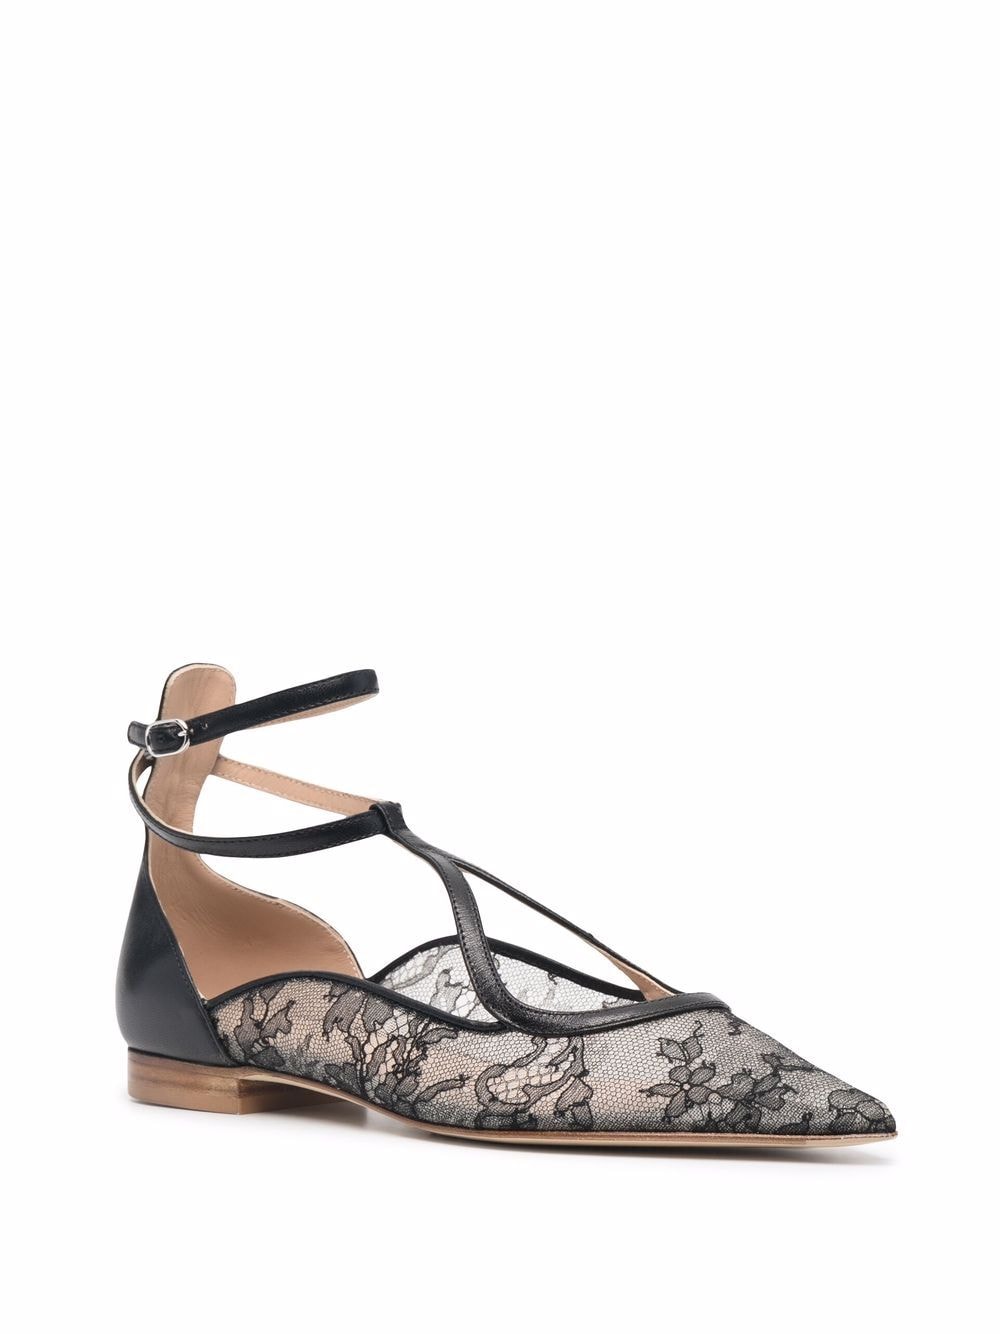 Image 2 of Scarosso Gae floral-lace ballerina shoes